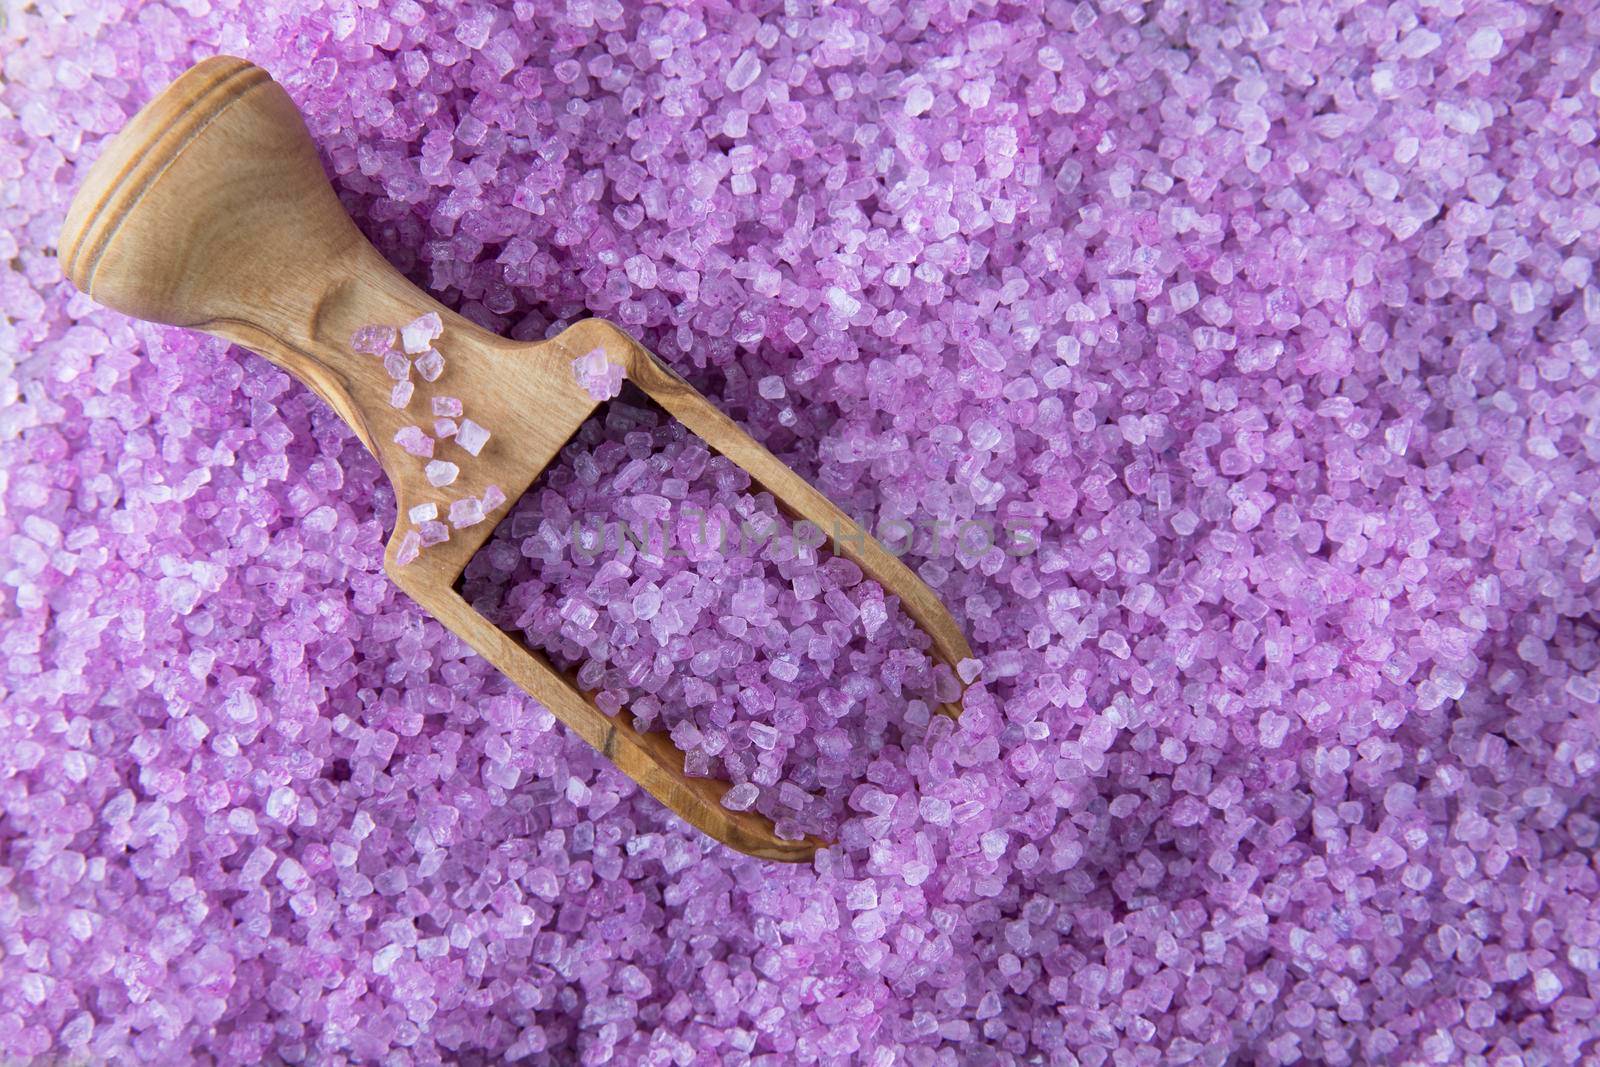 Purple bath salts with wooden scoop filling frame and viewed from above